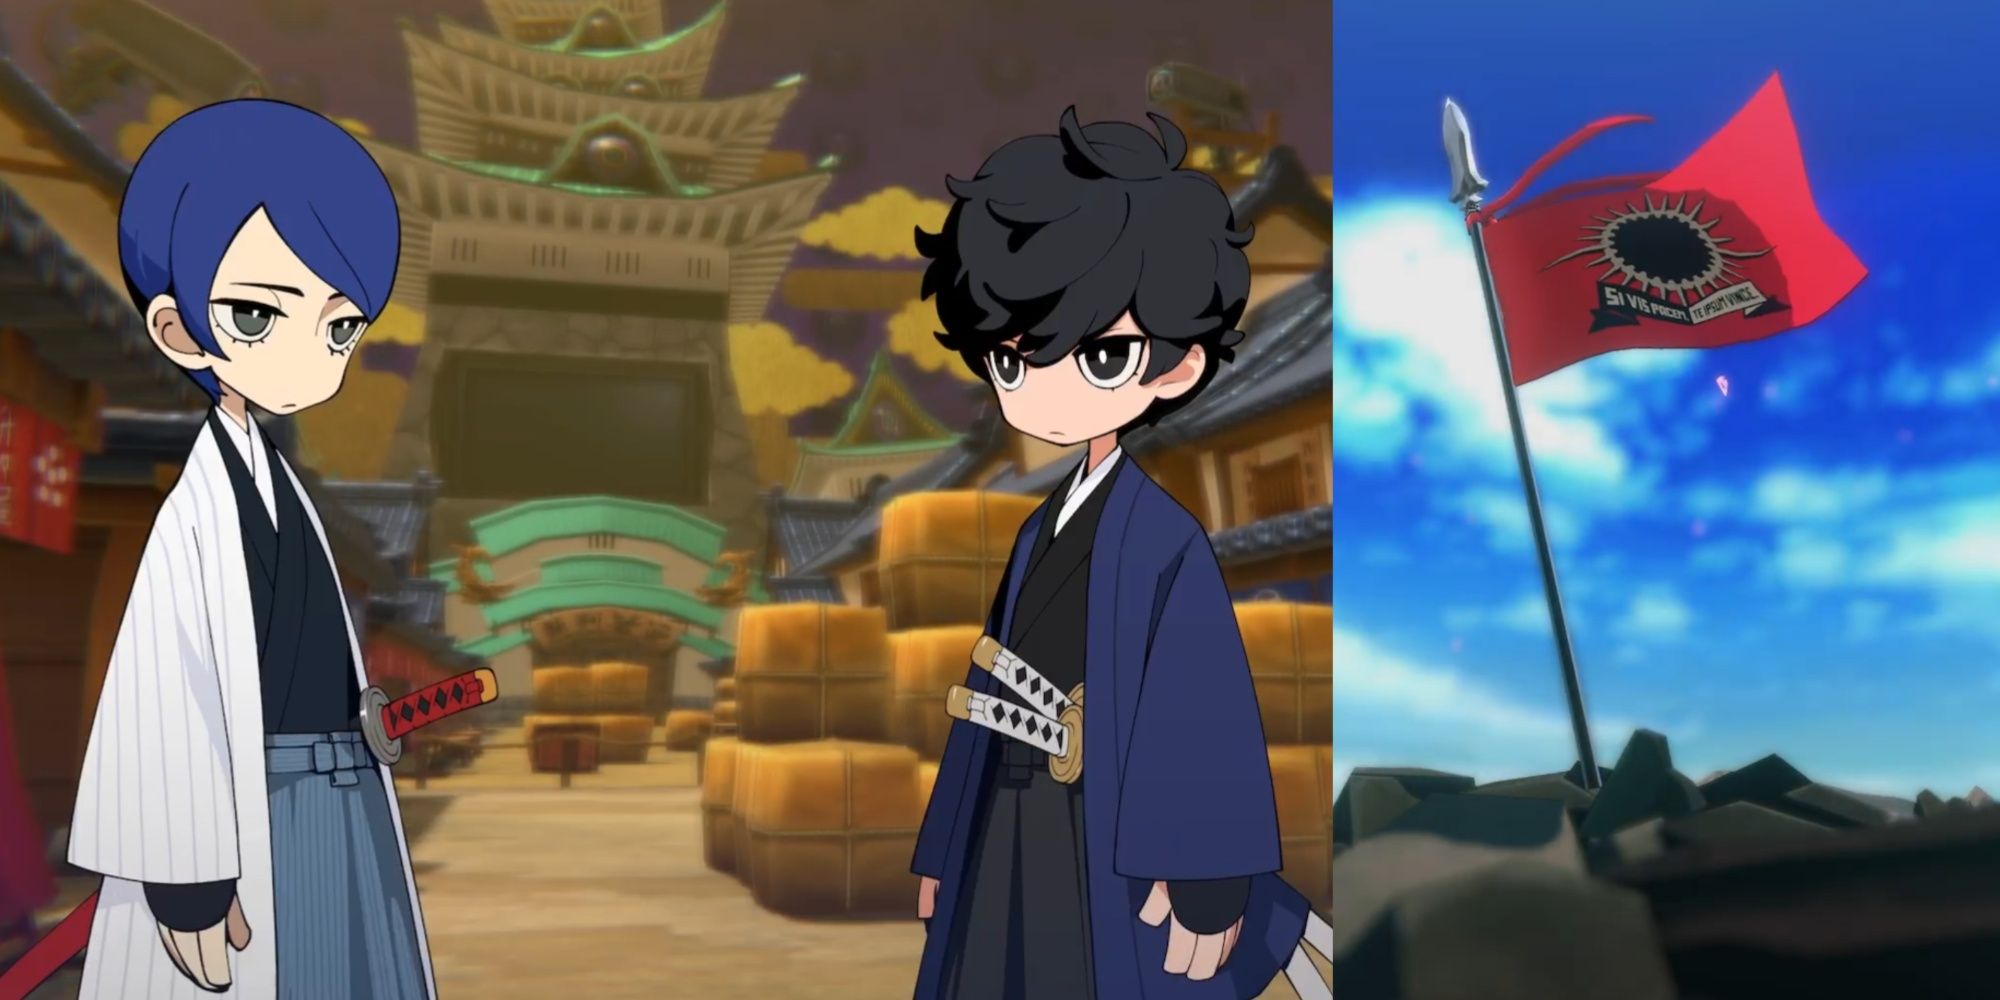 A collage of Yusuke and Joker in their second kingdom disguises with Erina's flag planted in Persona 5 Tactica.